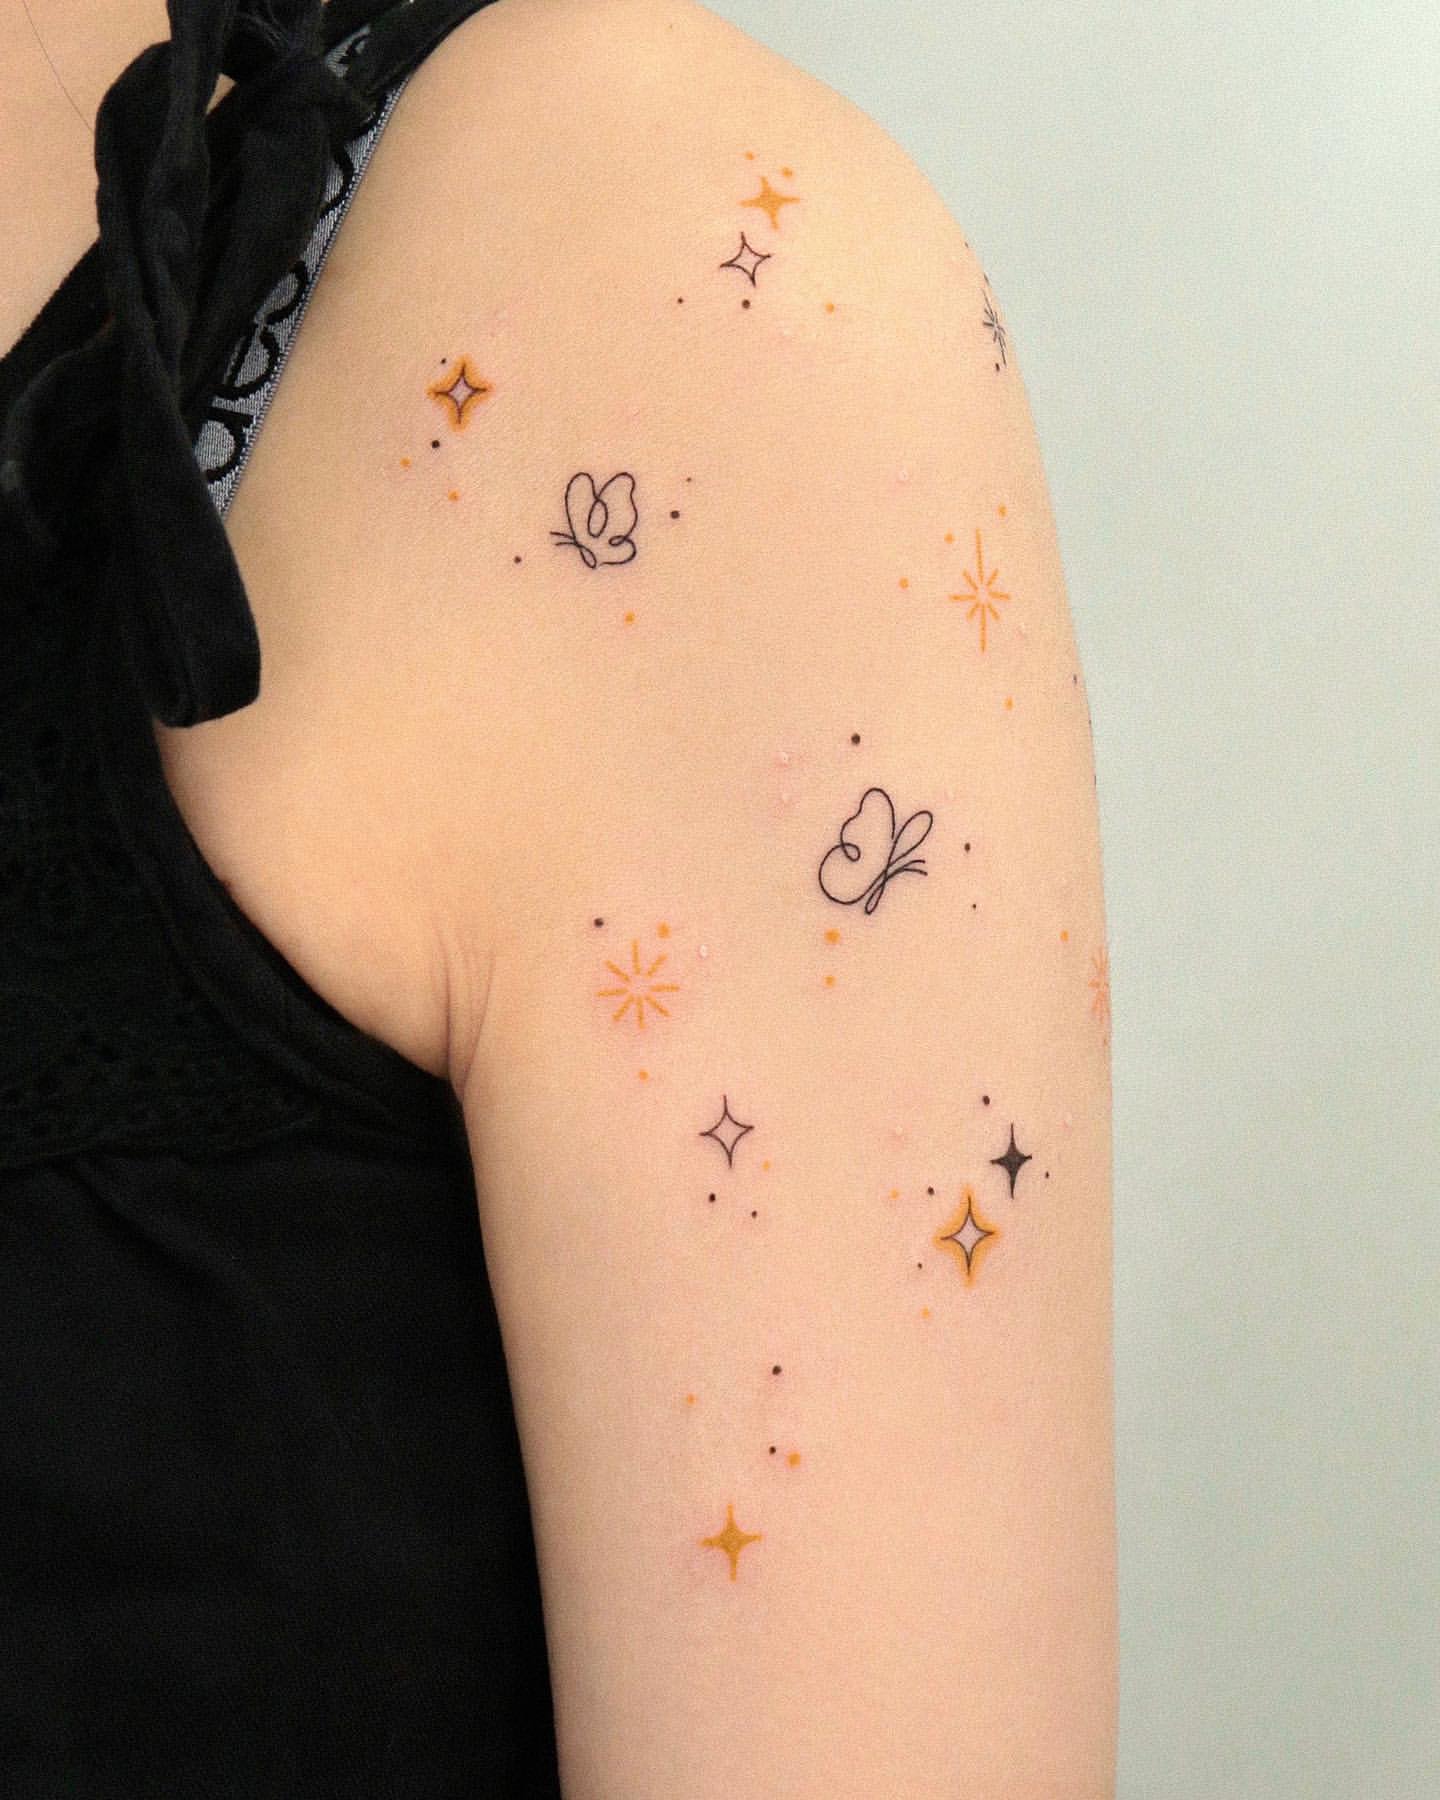 Small Tattoos for Women 12